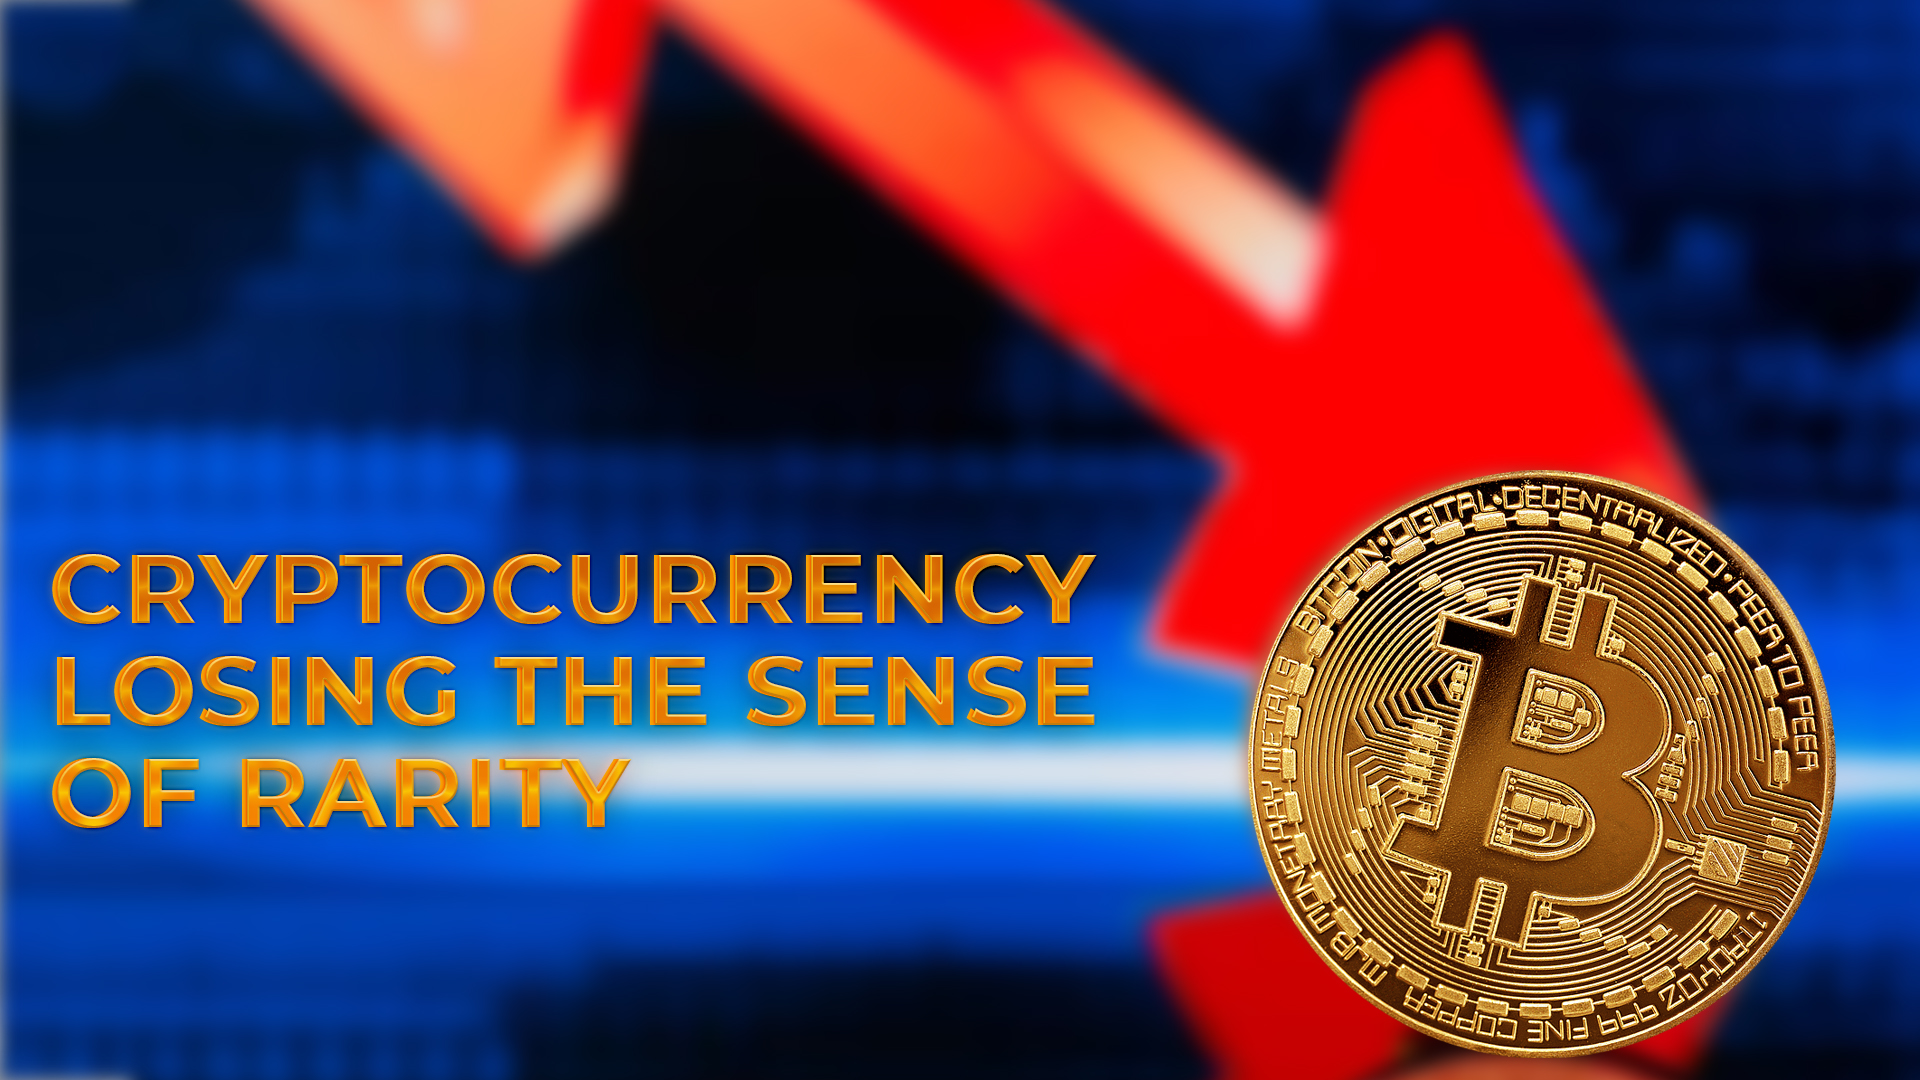 Is Cryptocurrency Losing its Sense of Rarity? If Yes, Why?